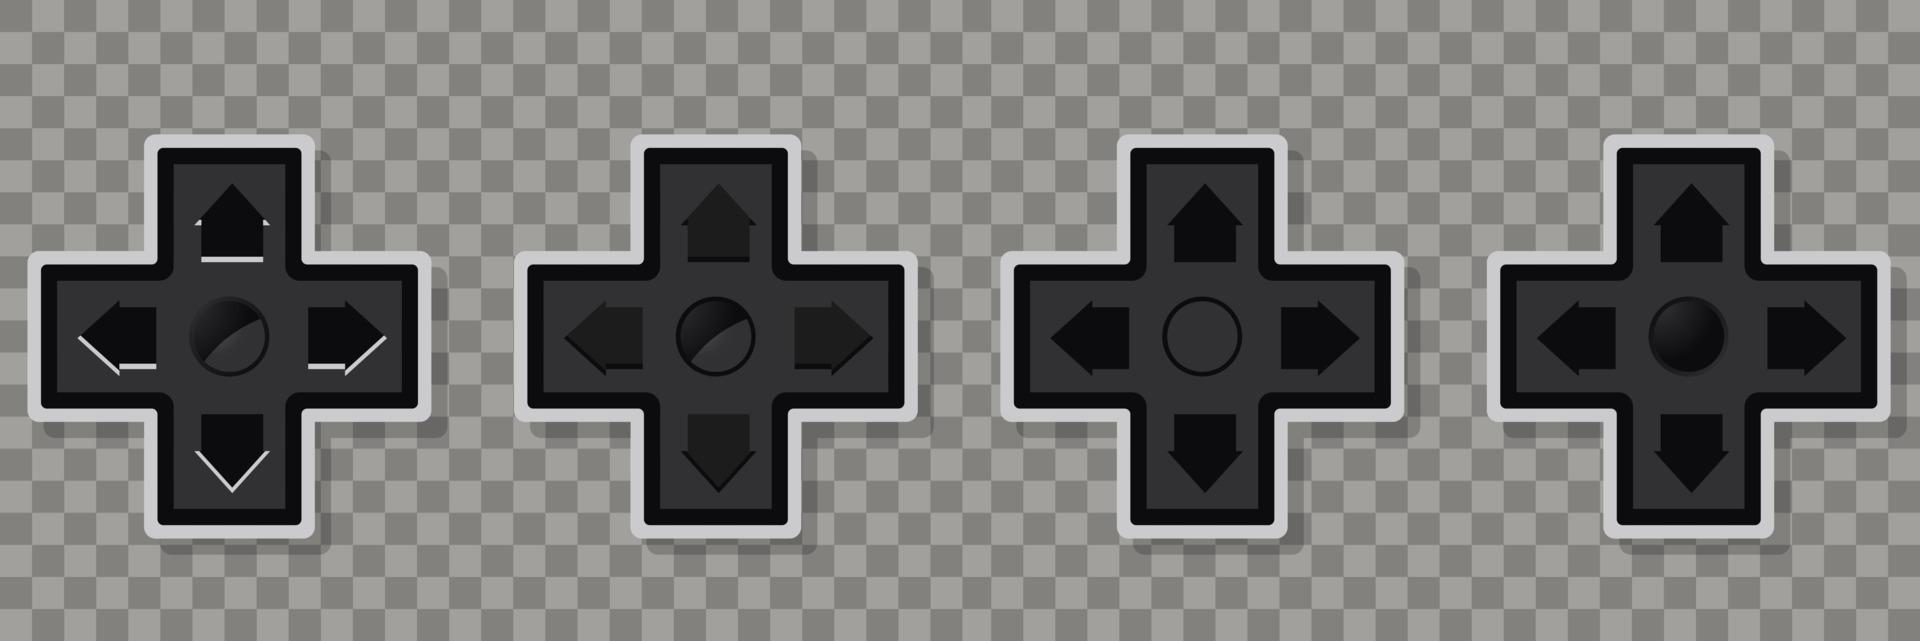 Retro gamepad buttons of classic video gaming from the 80s and 90s. Vector illustration